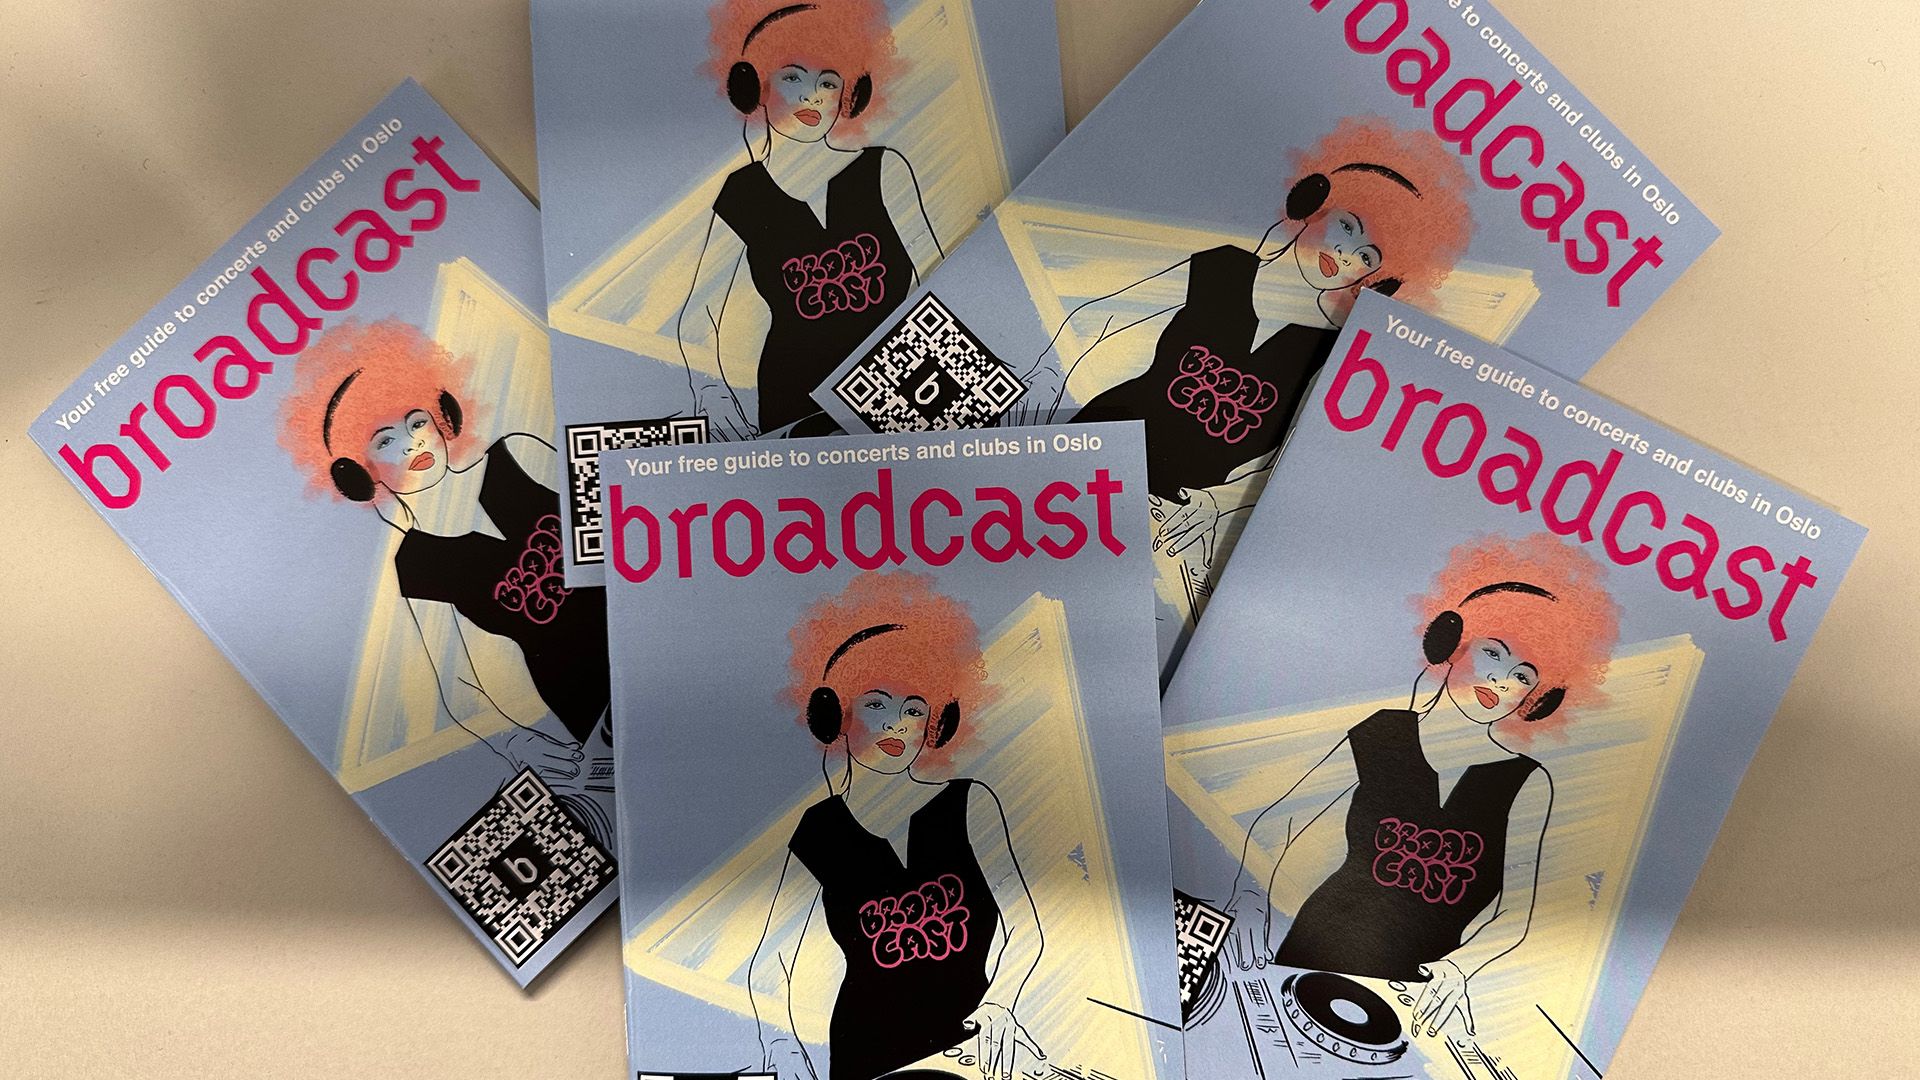 Cover Image for February 2023 issue of the Broadcast magazine is out!